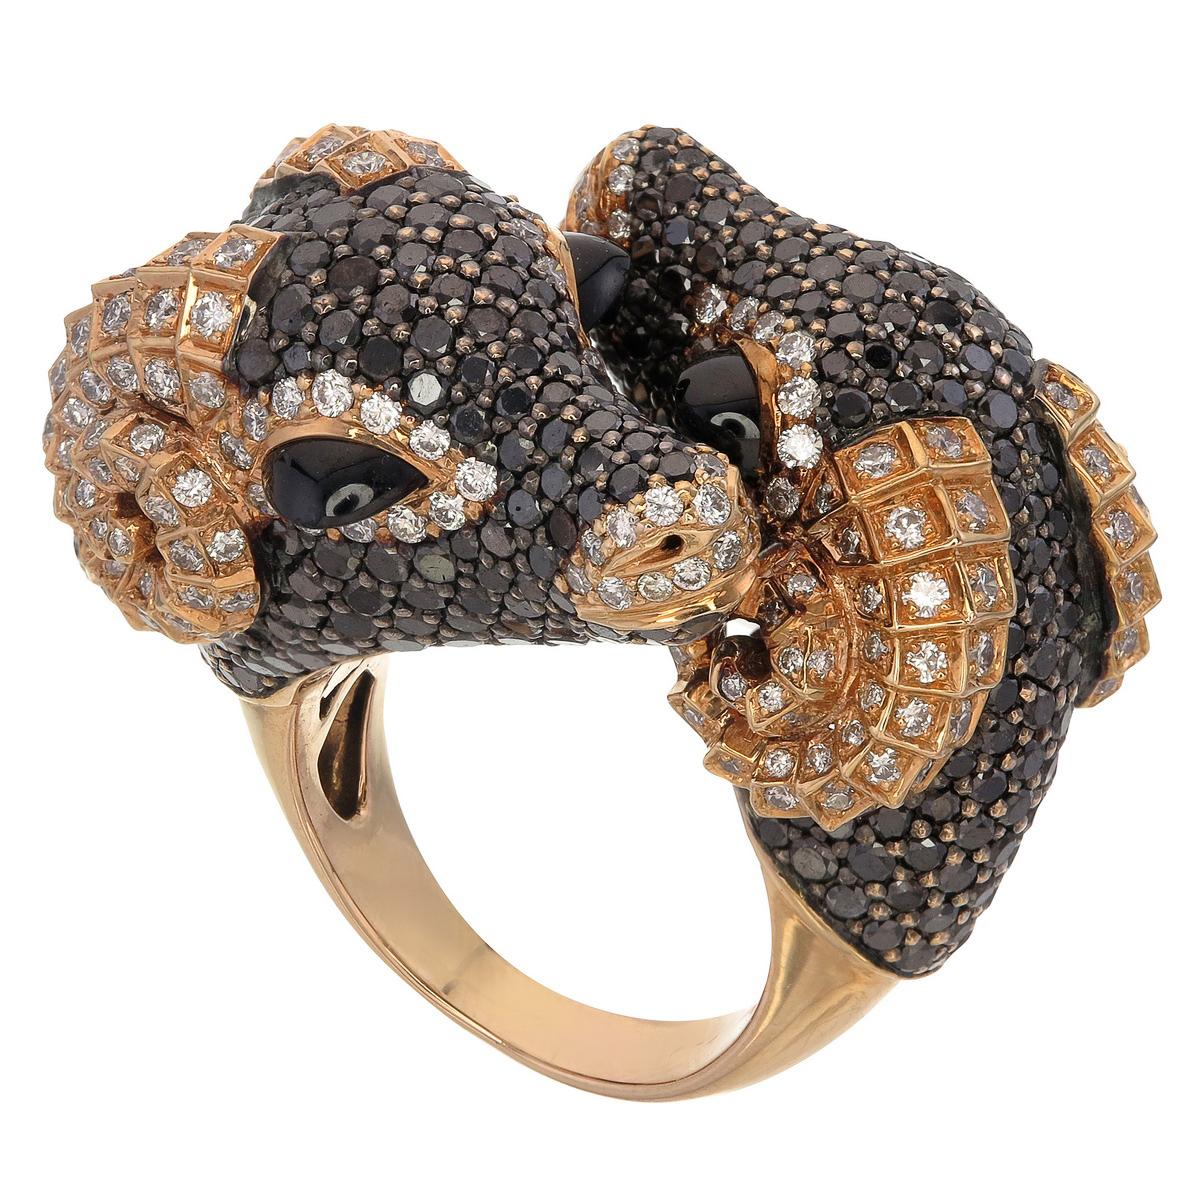 Sauvage Collection- One of a kind ring

The tenacious two-faced rams ring, adorned with a 7.72-carat black diamond, resonates like a lullaby from the ridgetops. The 2.20-carat black spinel contributes to rams’ divinization and vivaciousness. Encased